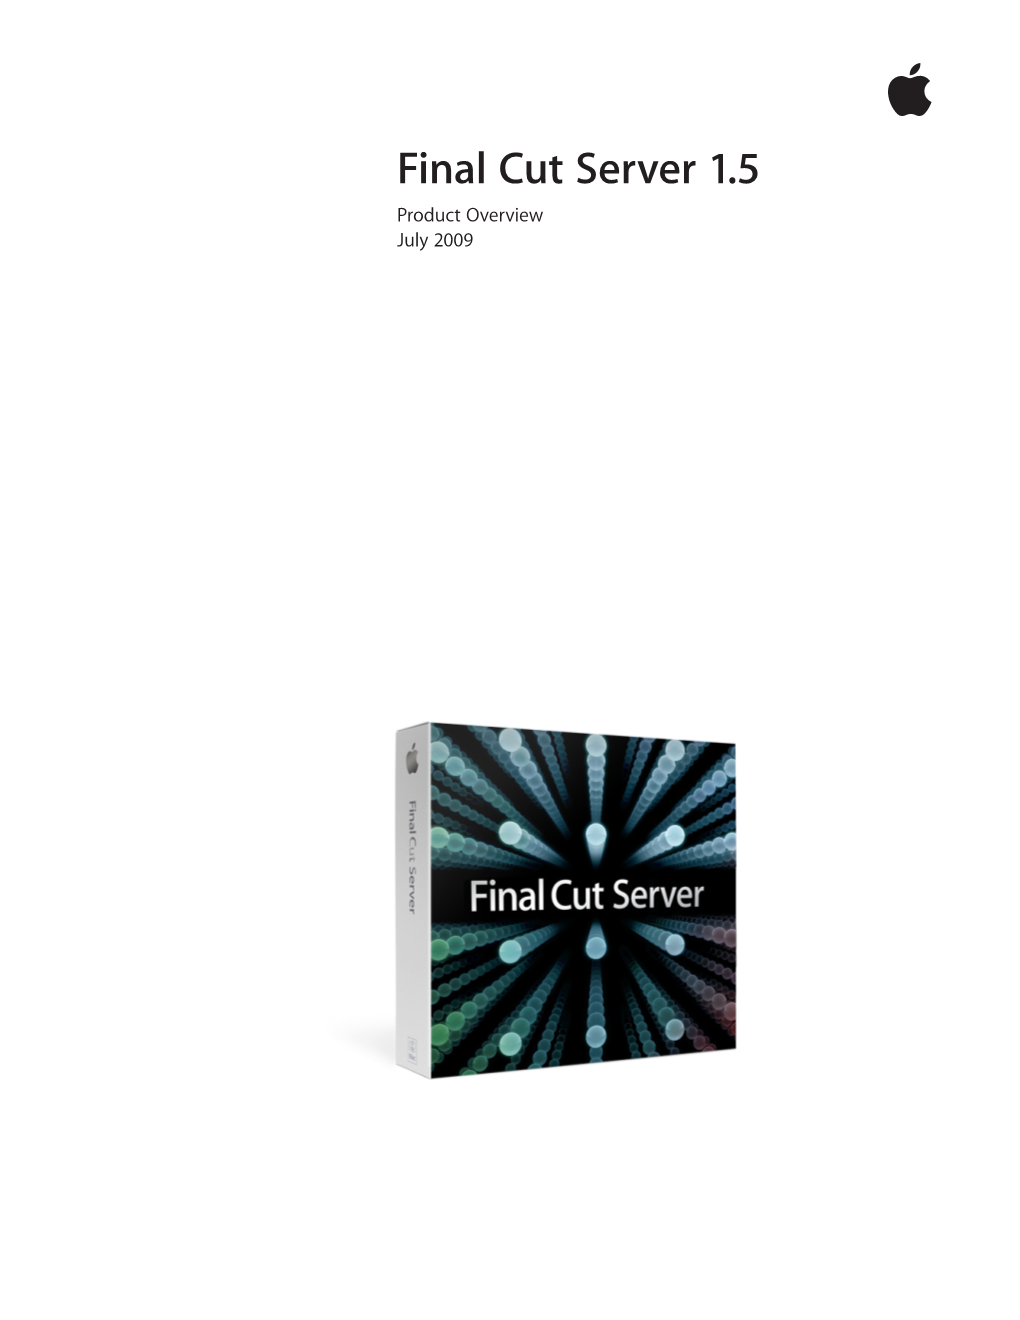 Final Cut Server 1.5 Product Overview July 2009 Product Overview 2 Final Cut Server 1.5